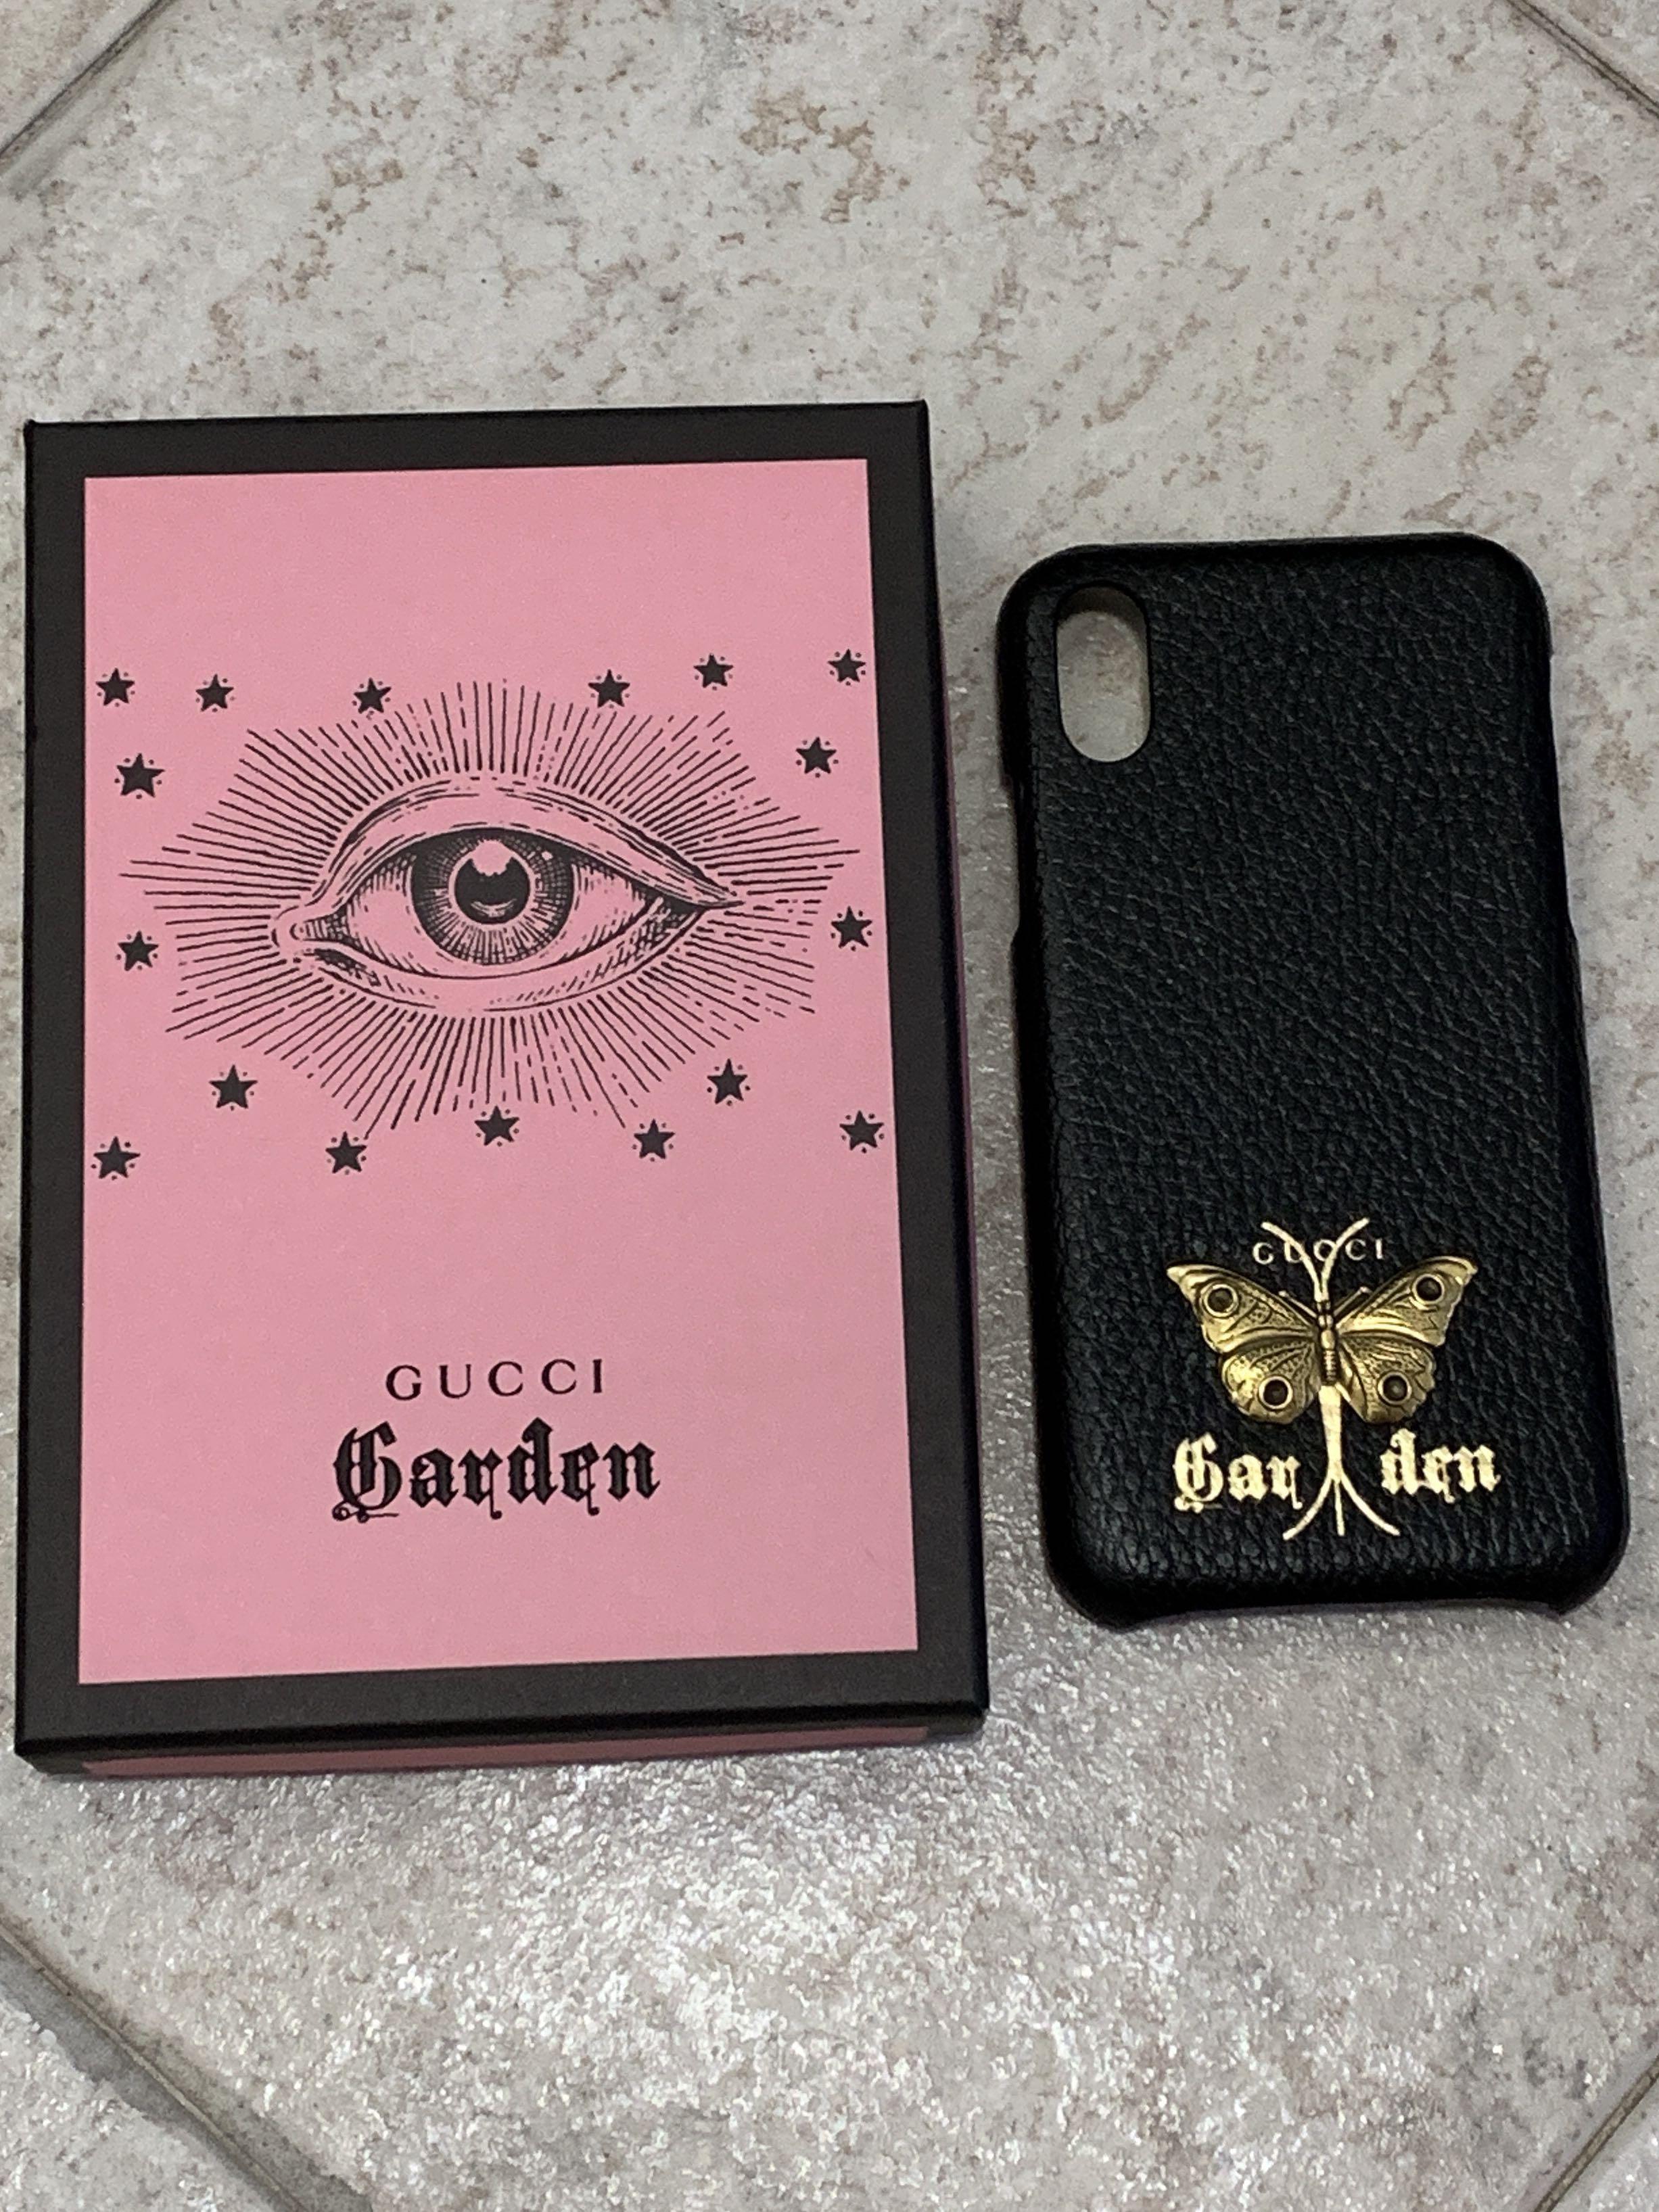 Gucci Garden iPhone X or Xs Cover